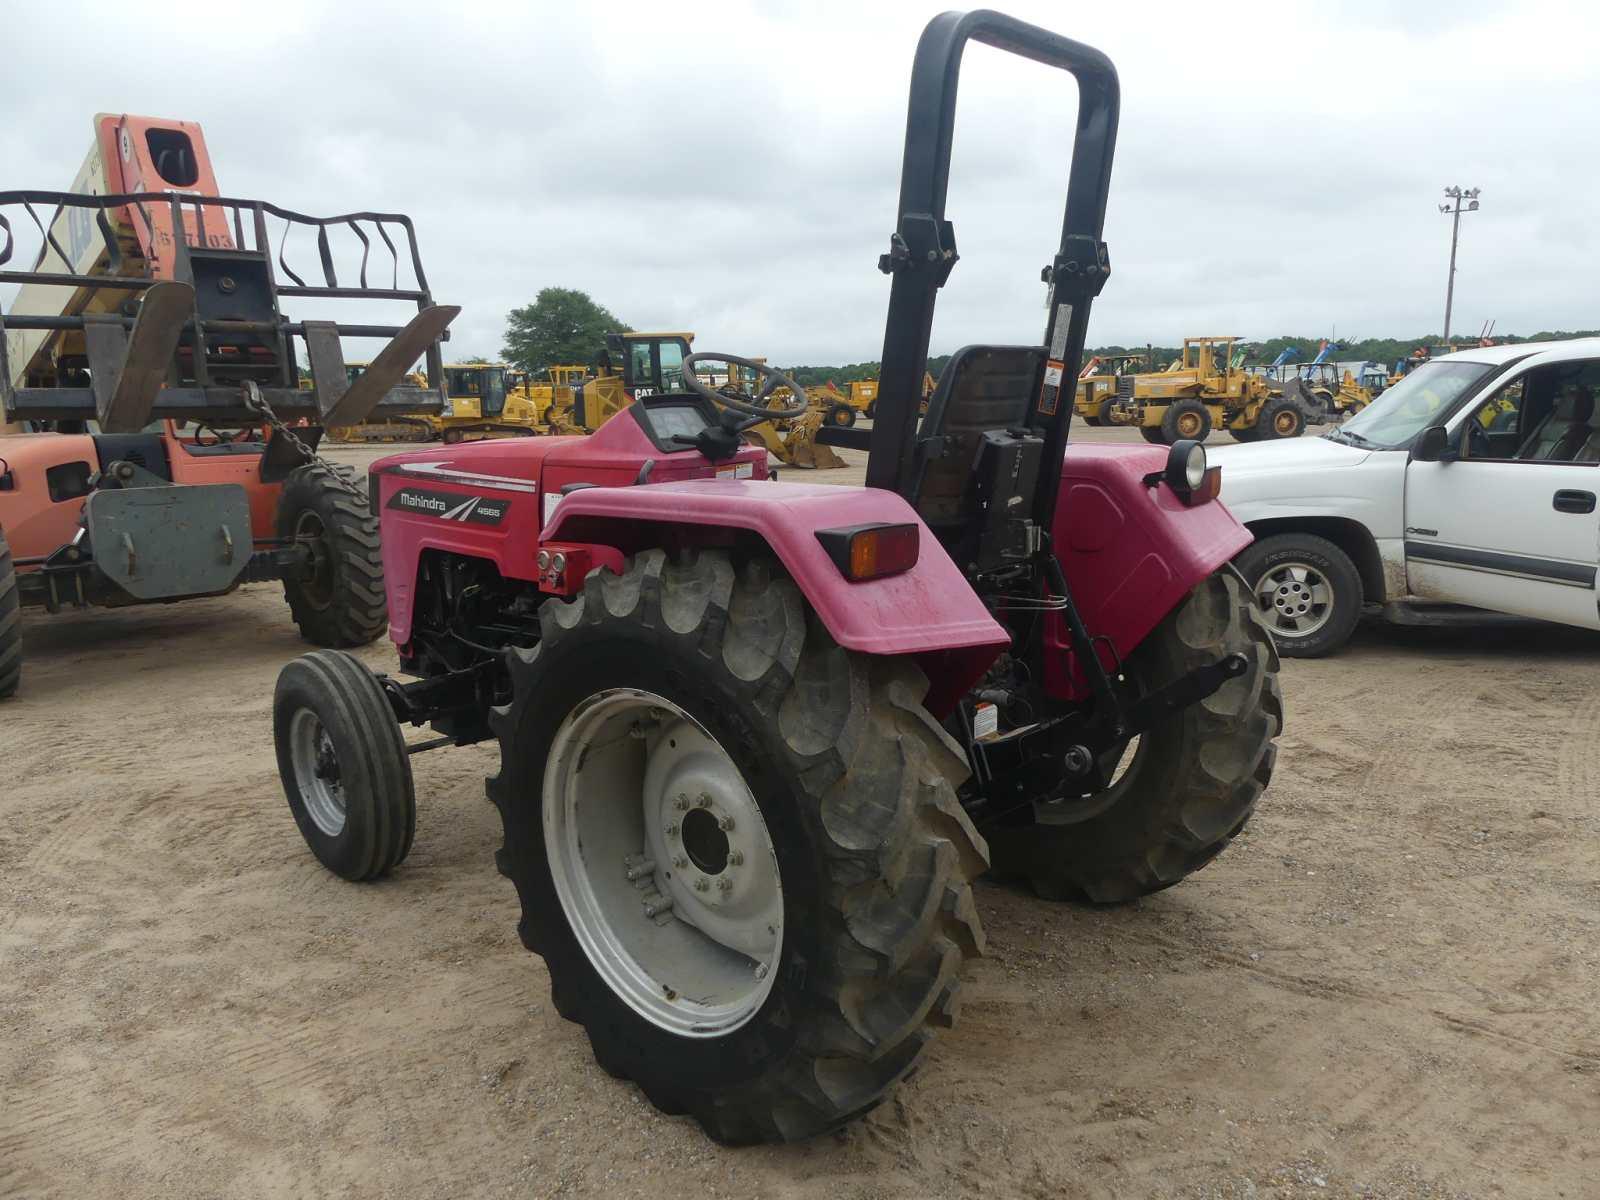 Mahindra 4565 Tractor, s/n P25TY2304 (Salvage): 2wd, Rollbar, 7089 hrs